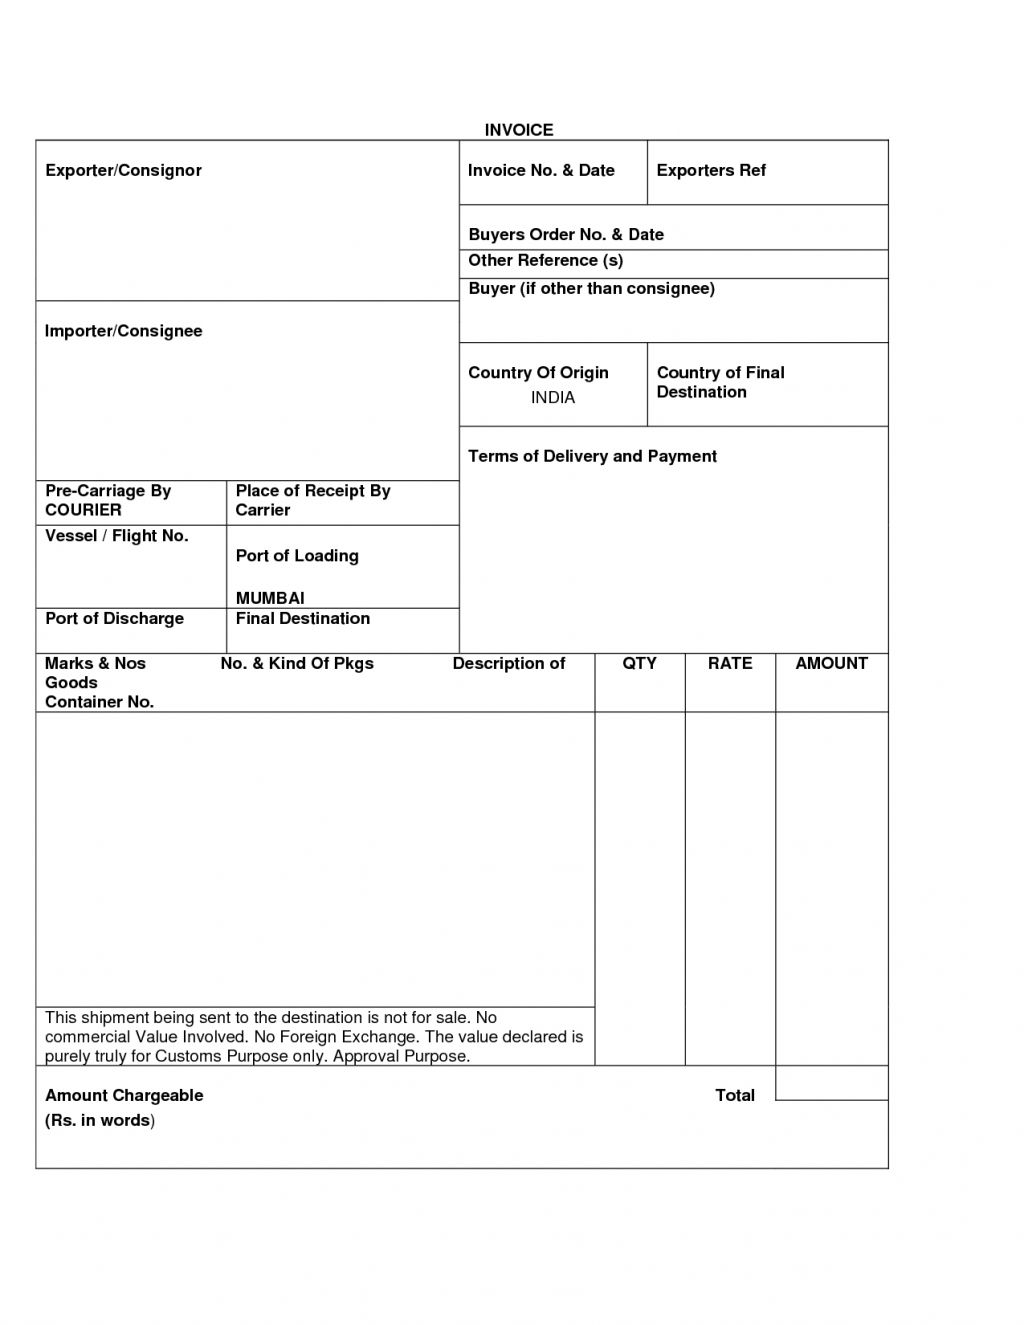 sample export invoice export invoice format invoicegenerator 1024 format of export invoice